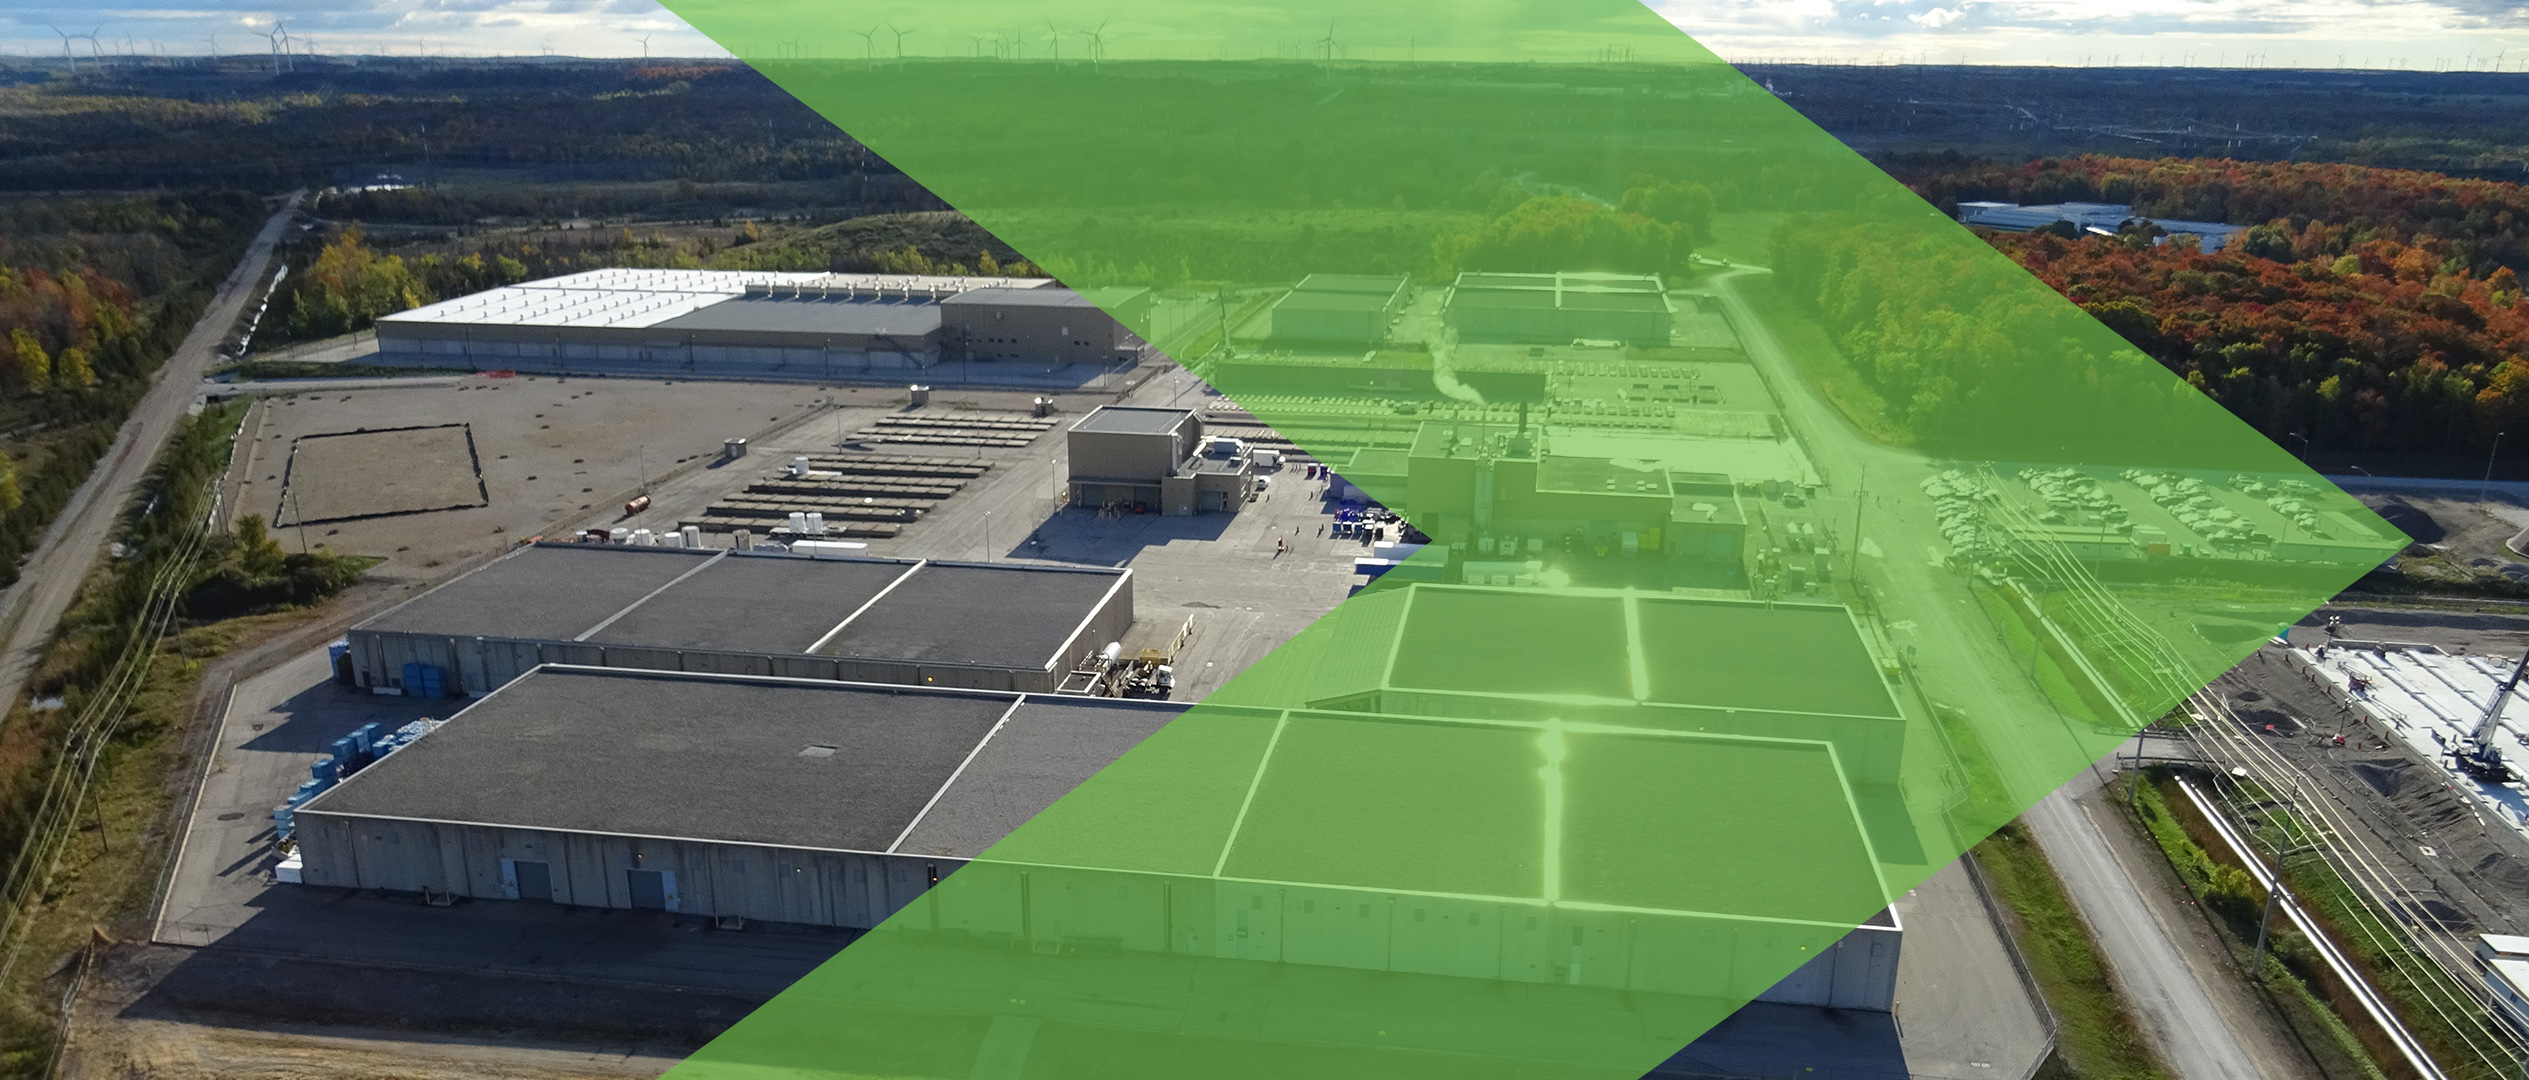 The Nuclear Sustainability Services - Western Facility with a green chevron